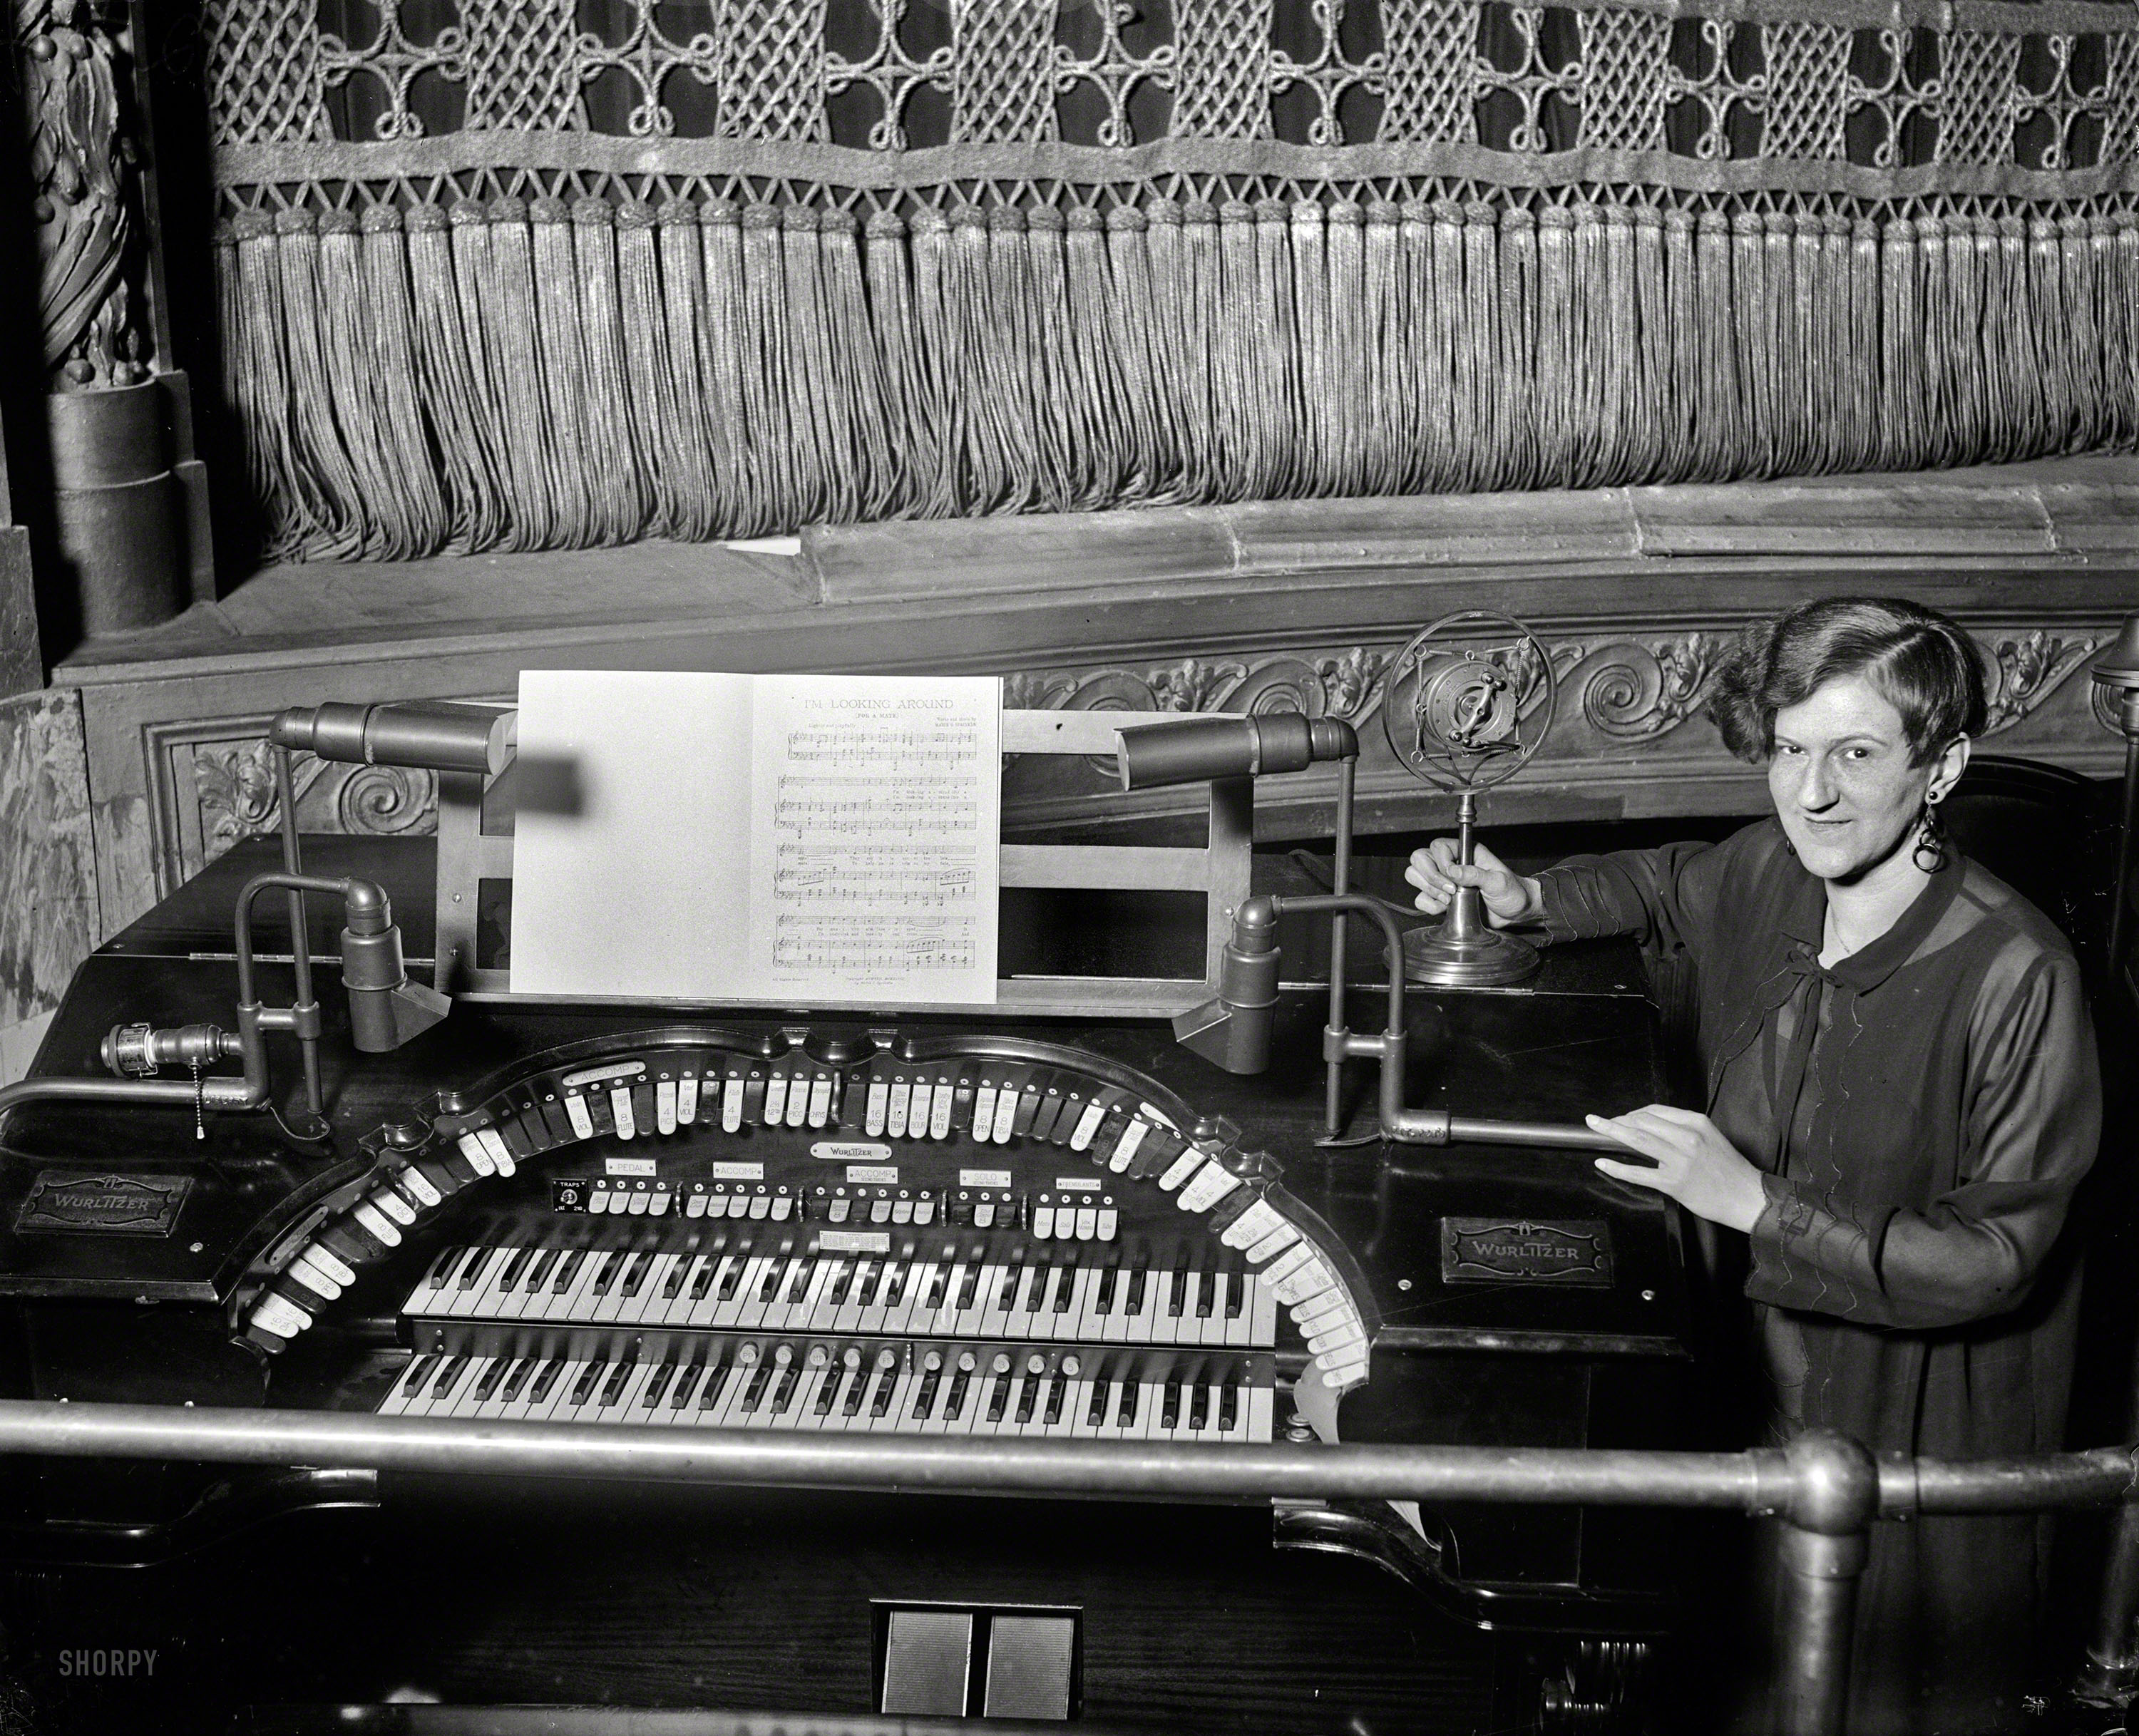 Washington. D.C., 1928. "Miss Irene Juno interprets the action pictured on the screen at Keith's Theater on the new $30,000 Wurlitzer orchestral unit recently installed to give the films added potency." Up next: "I'm Looking Around (For a Mate)." Harris & Ewing Collection glass negative. View full size.